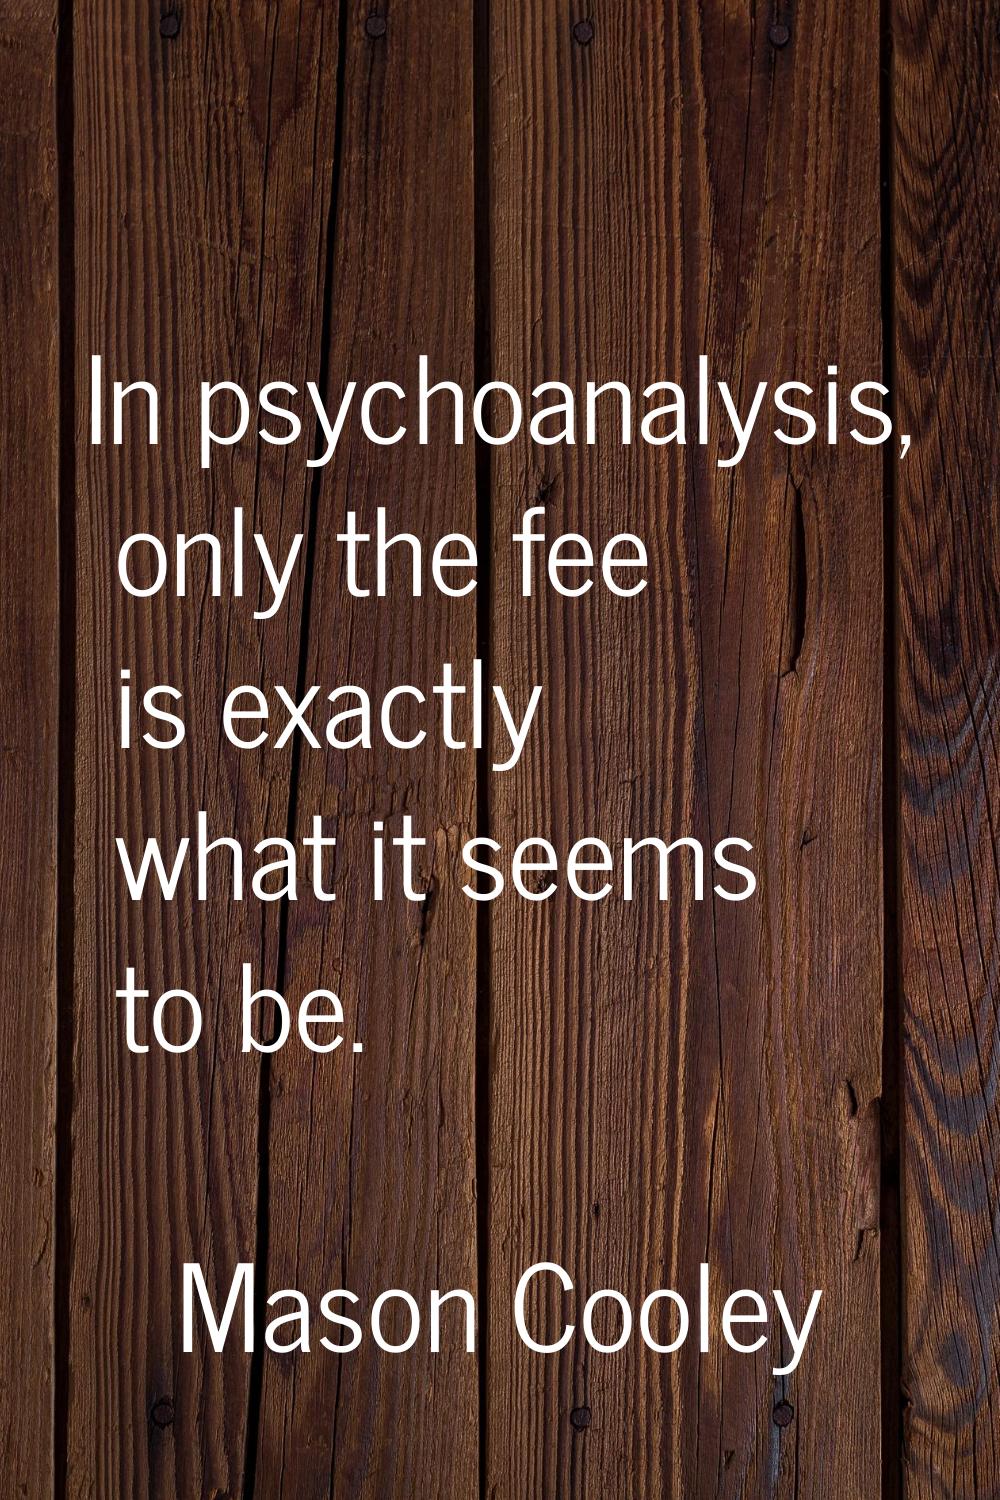 In psychoanalysis, only the fee is exactly what it seems to be.